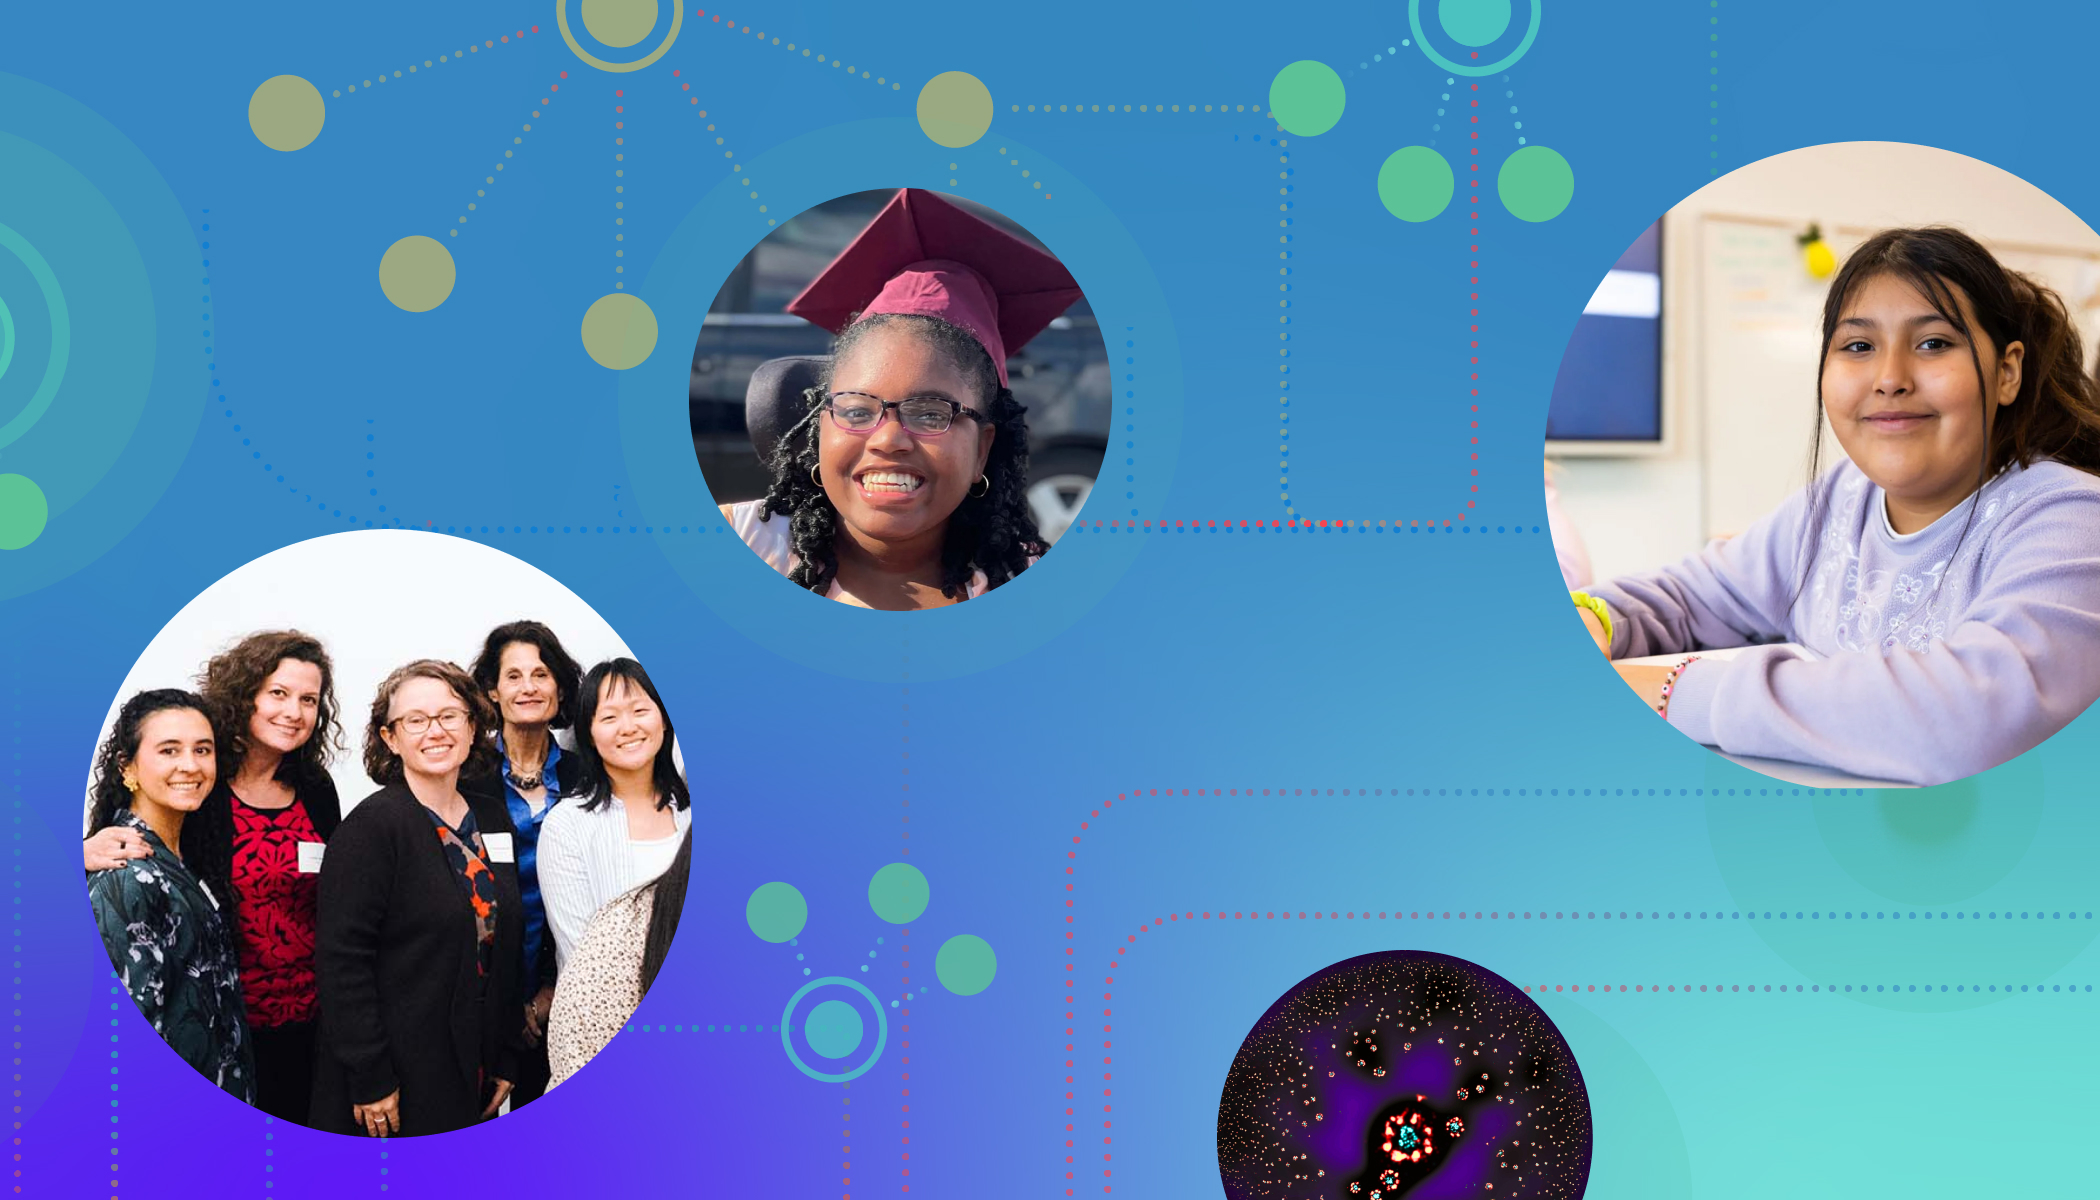 Four circular images related to CZI’s work in science, education and California’s Bay Area community on a blue gradient background. The images are connected by thin lines and dots.